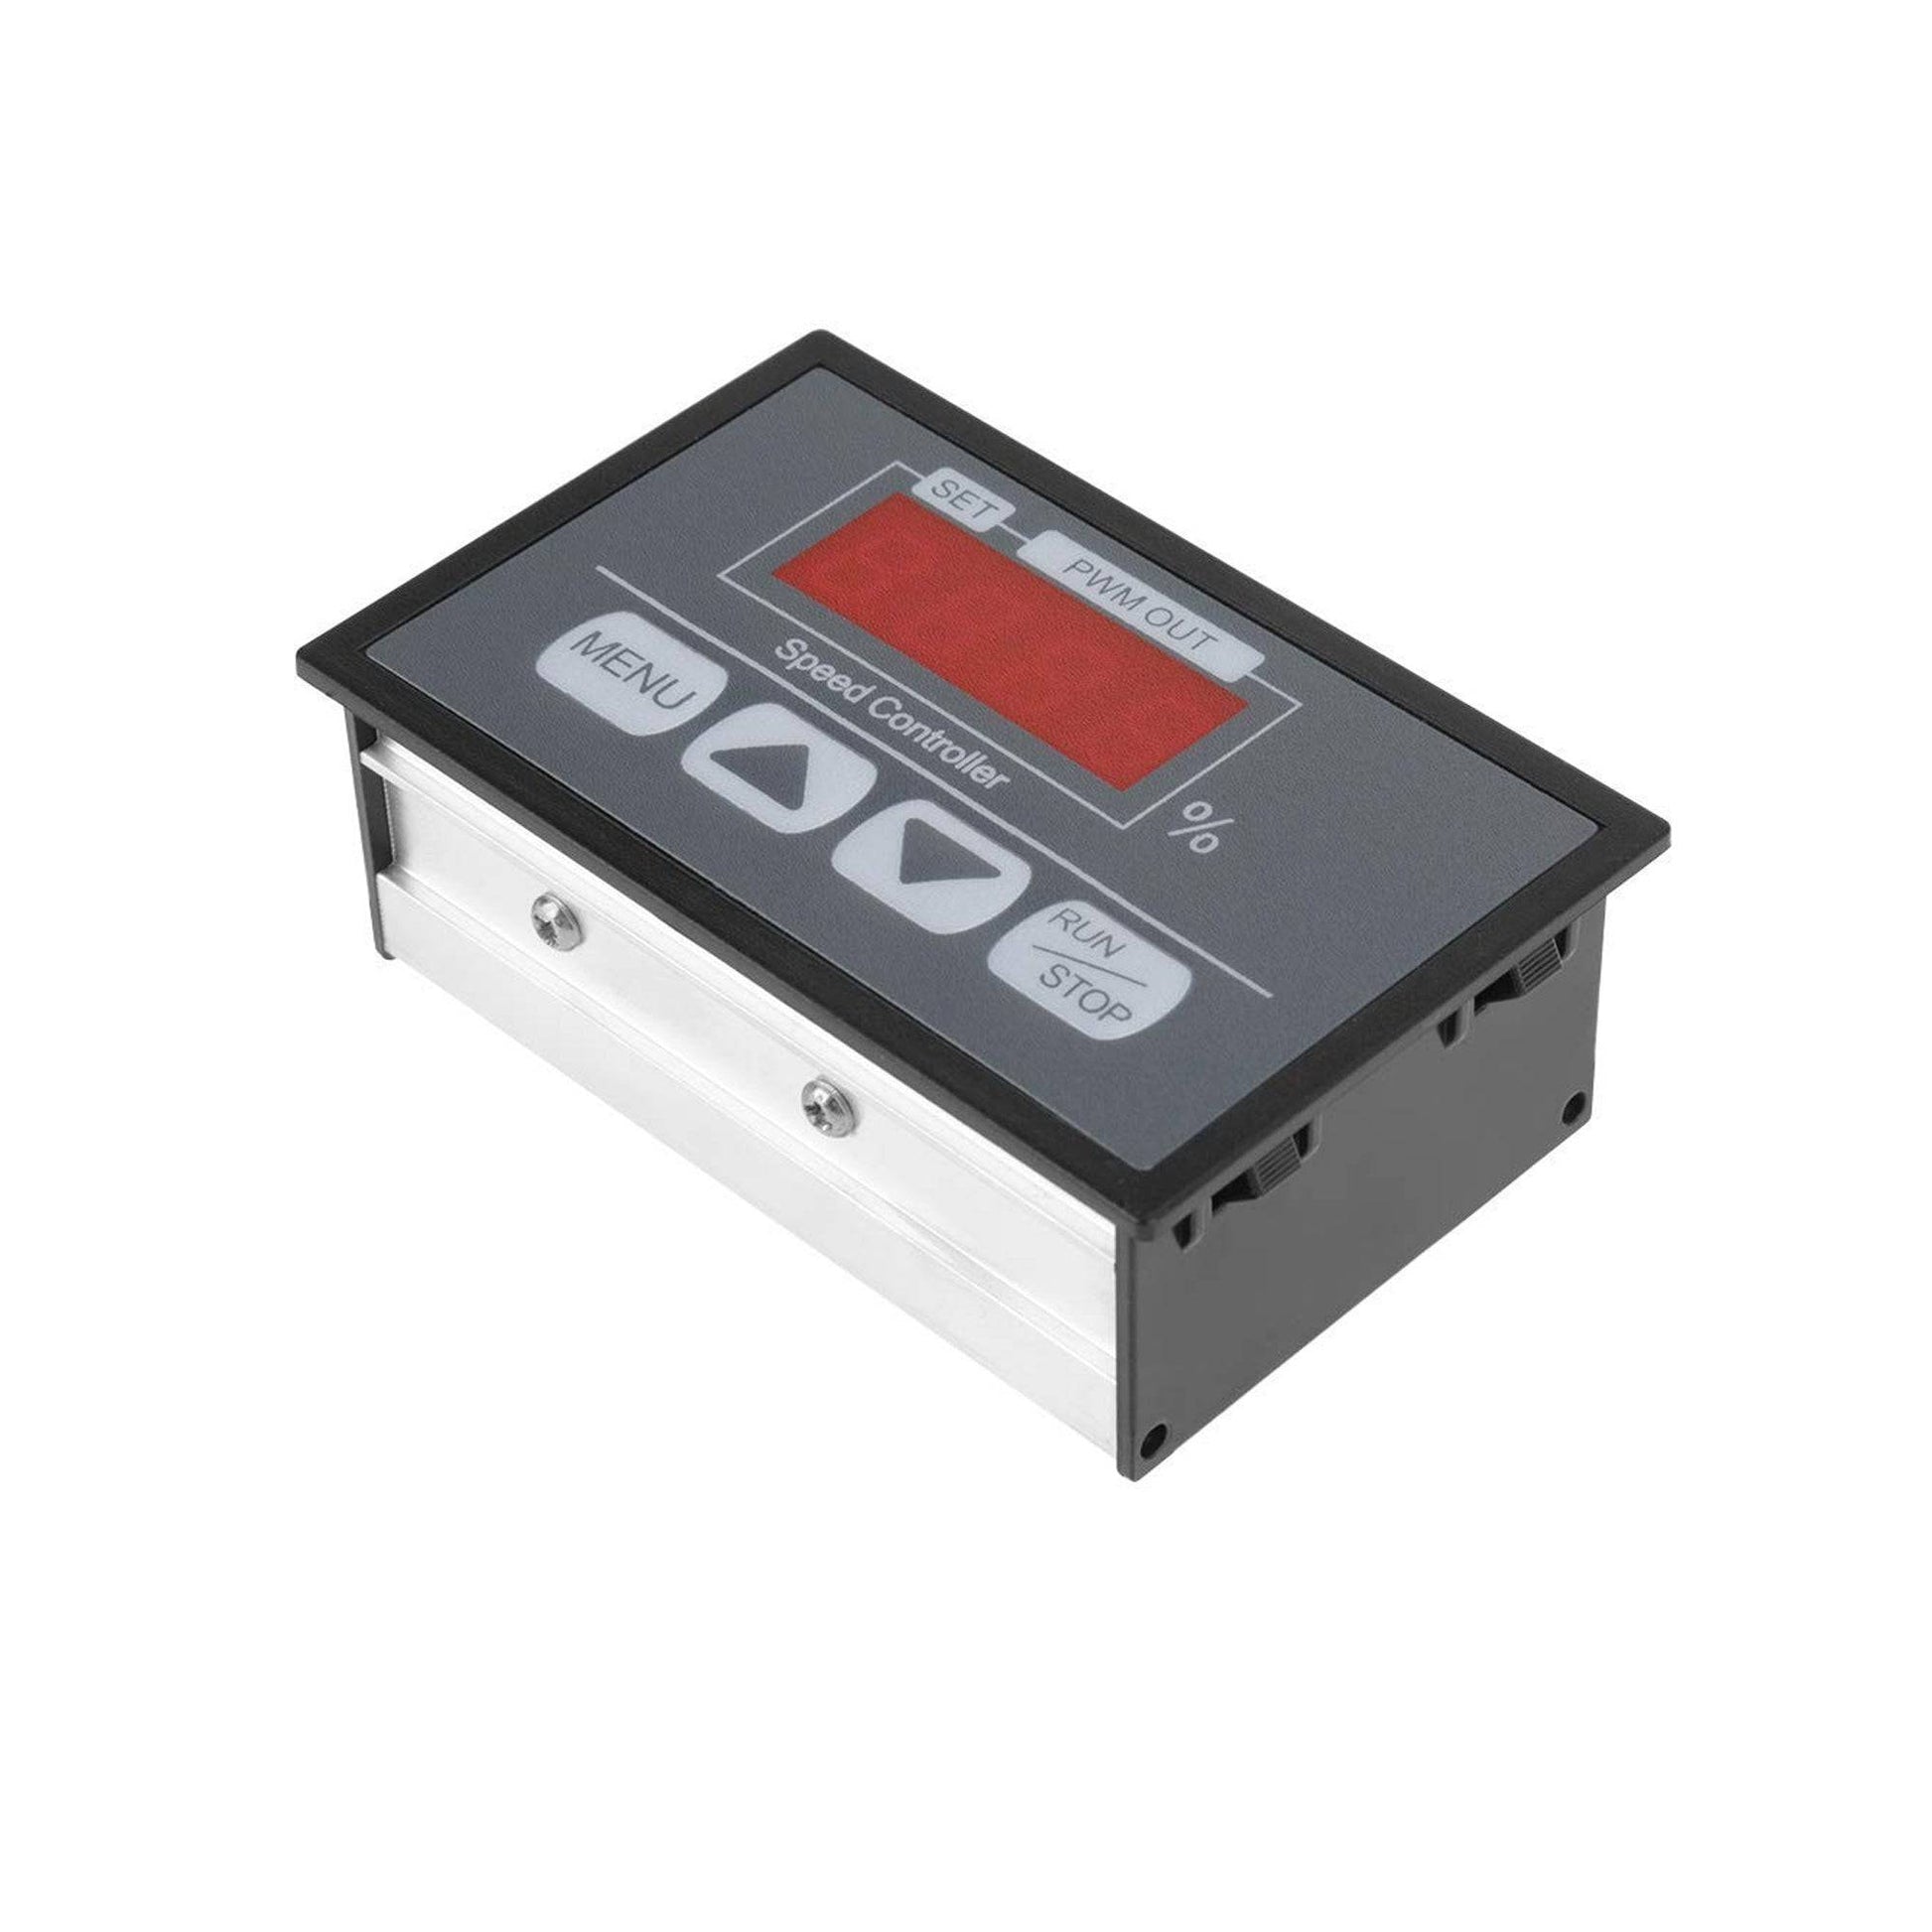 6-60V 30A Motor Speed Controller with Digital Display